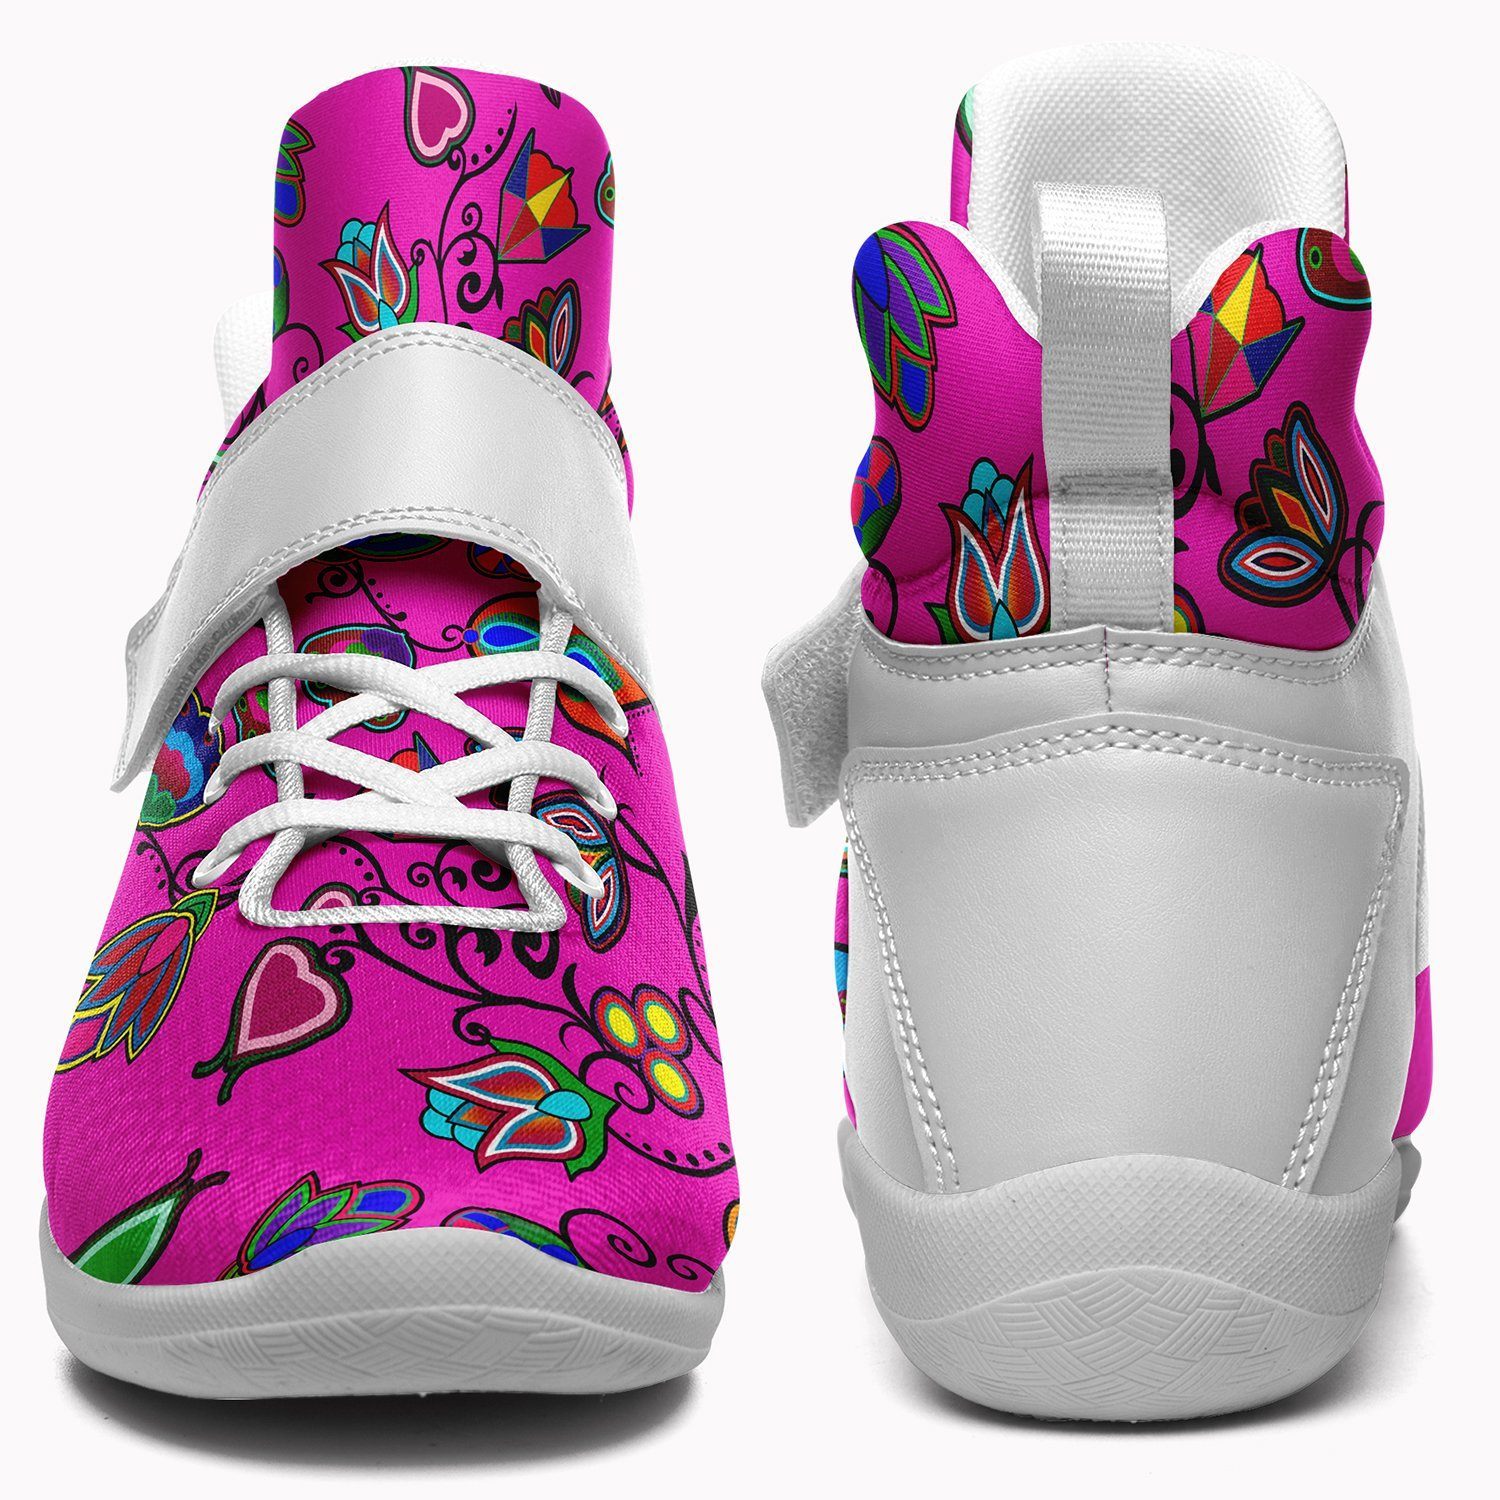 Indigenous Paisley Ipottaa Basketball / Sport High Top Shoes - White Sole 49 Dzine 